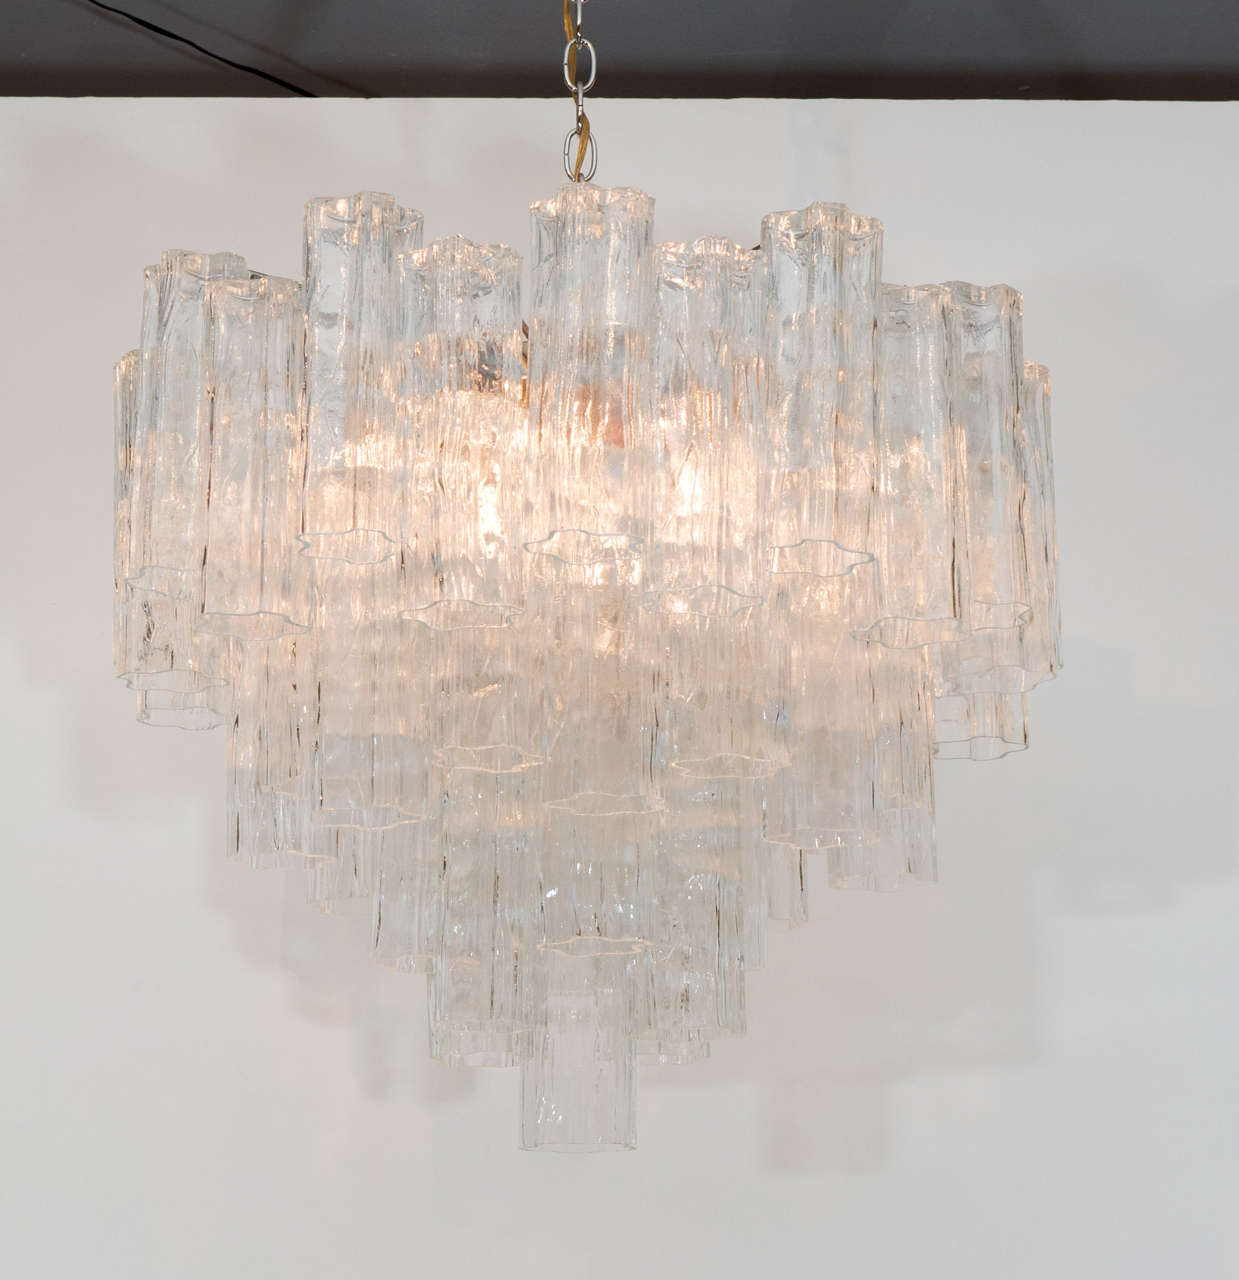 Grand and showy chandelier. The piece has a beautiful form with multiple tiers of Murano tronchi crystals suspended from a chrome armature. Please contact for location.